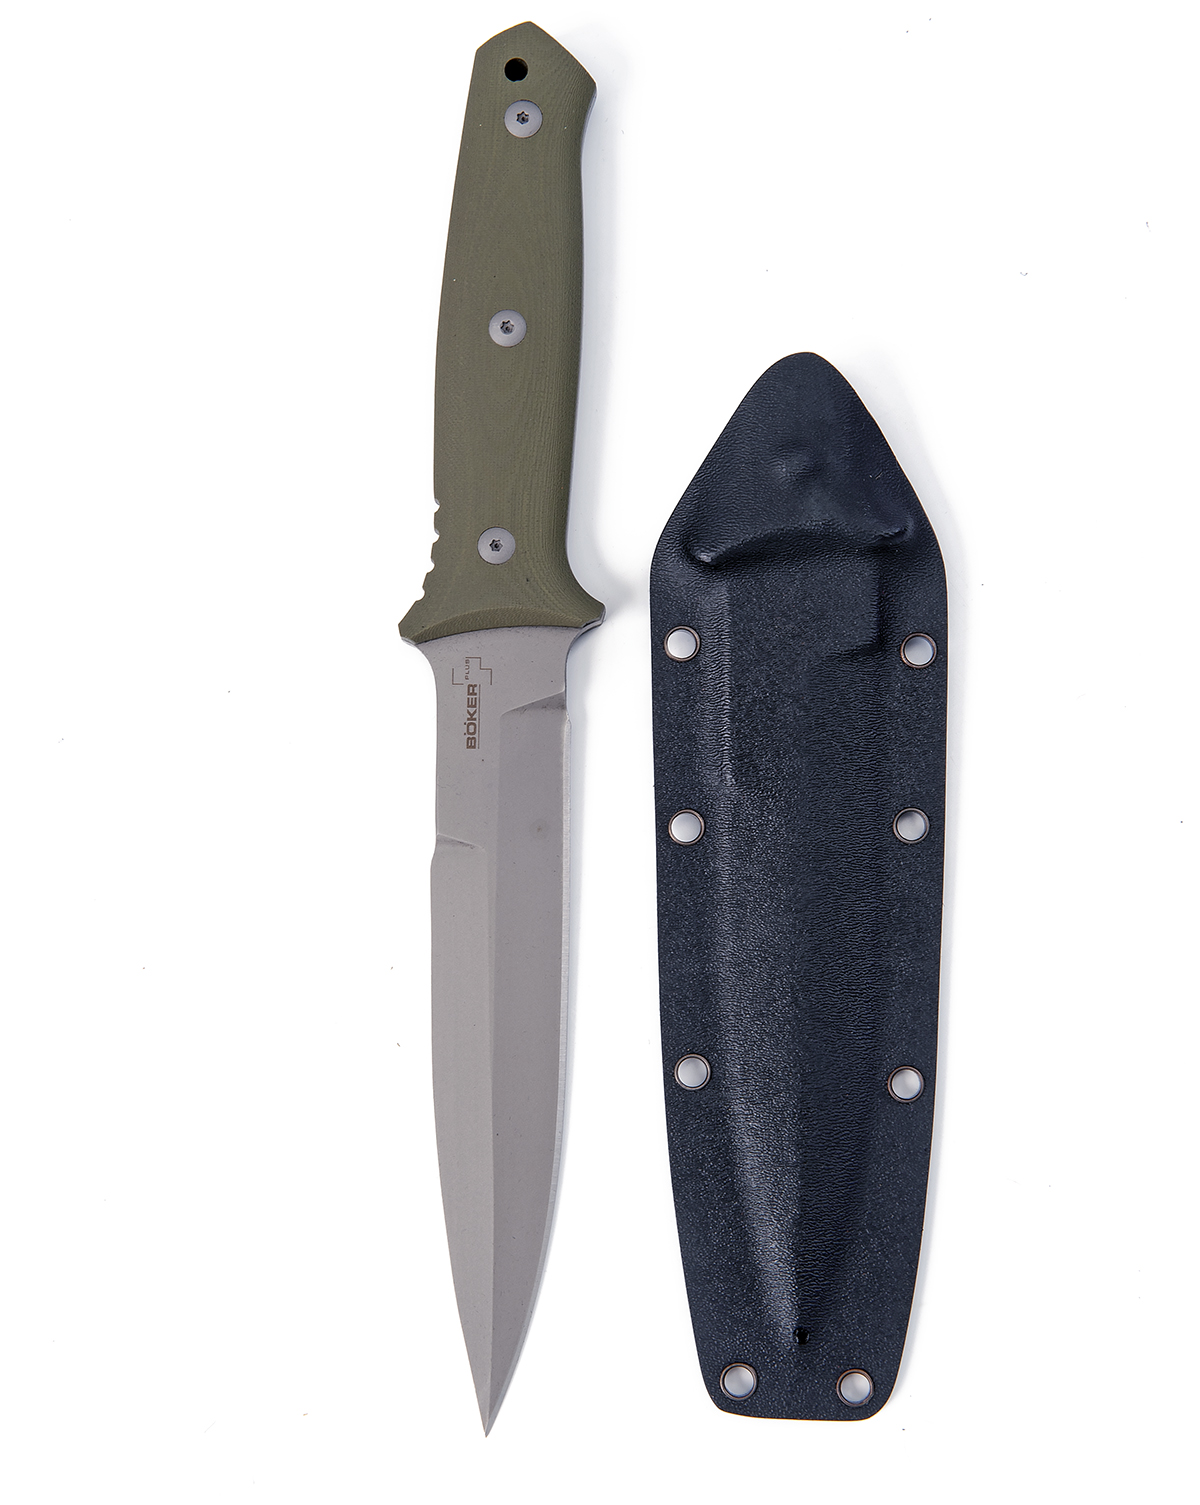 BOKER, GERMAN BOKER, A GOOD COLLECTION OF FIVE BOXED OUT OF PRODUCTION 'BOKER-PLUS' SHEATH-KNIVES, - Image 6 of 11